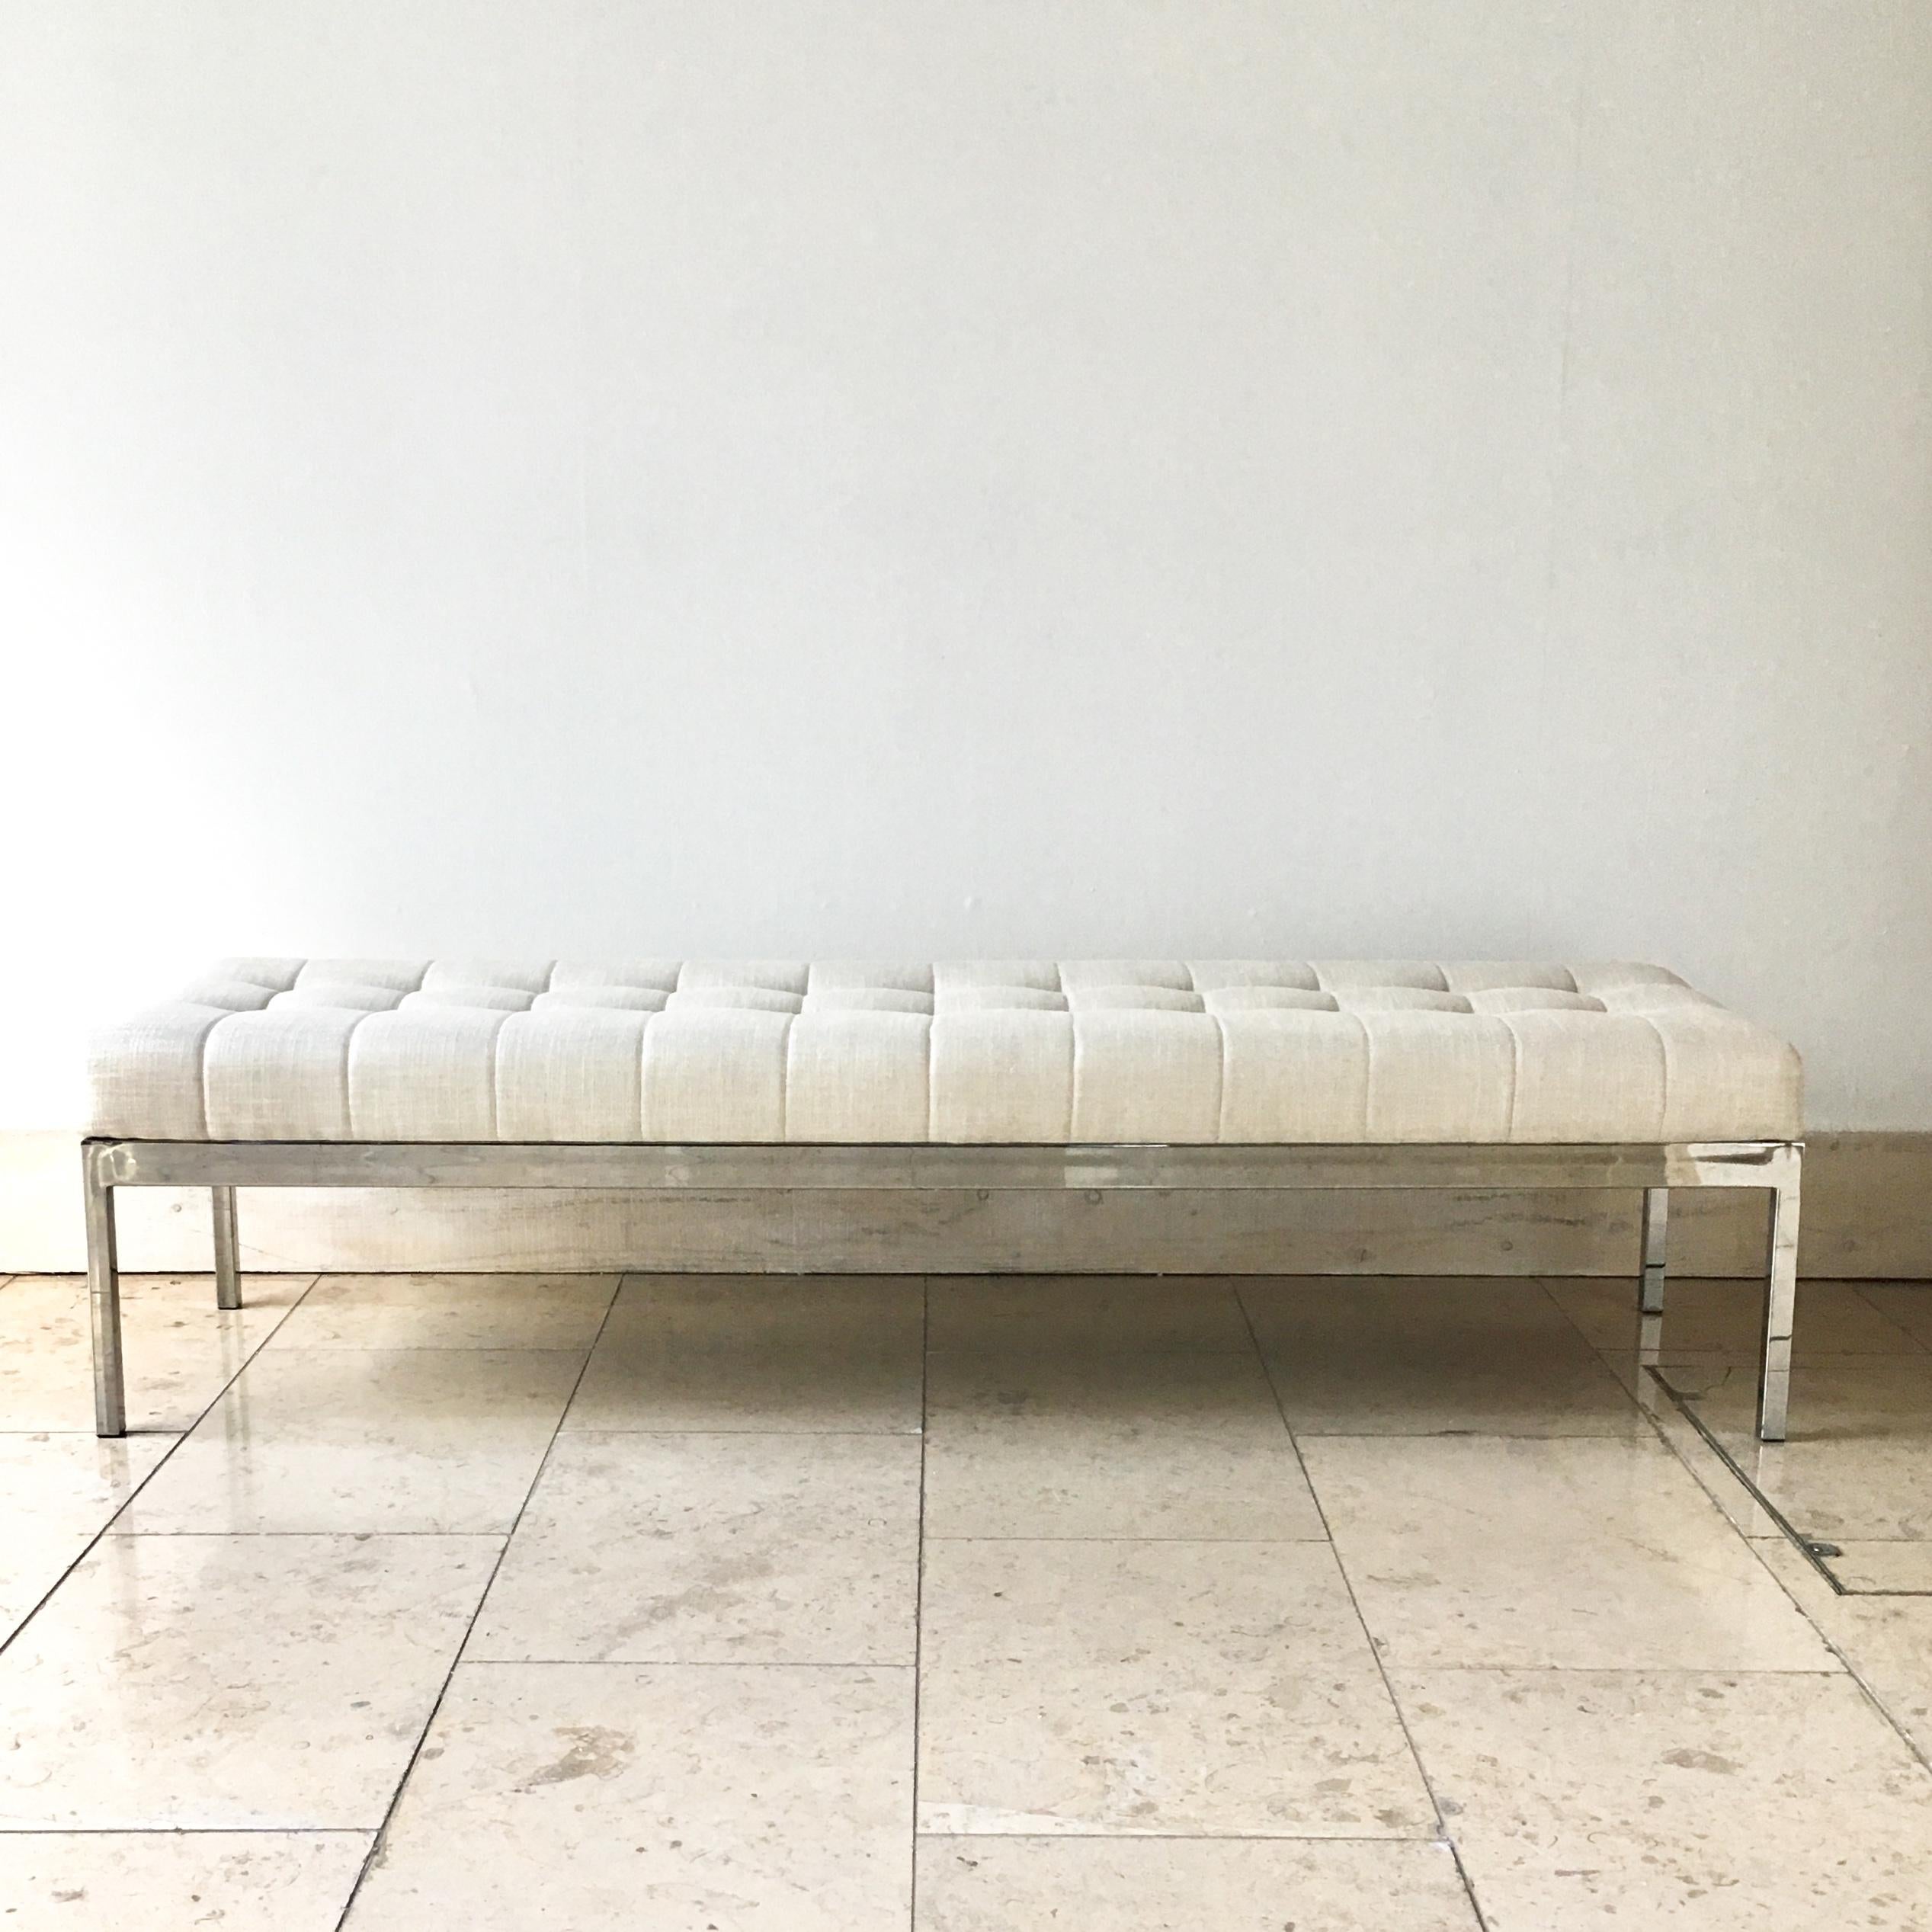 A Milo Baughman attributed nickel framed glazed linen upholstered bench with buttoned seat 1970s

Frame has some age marking due to internal oxidation 

Milo Baughman Design Inc was established in 1947. In 1948 he helped create the California